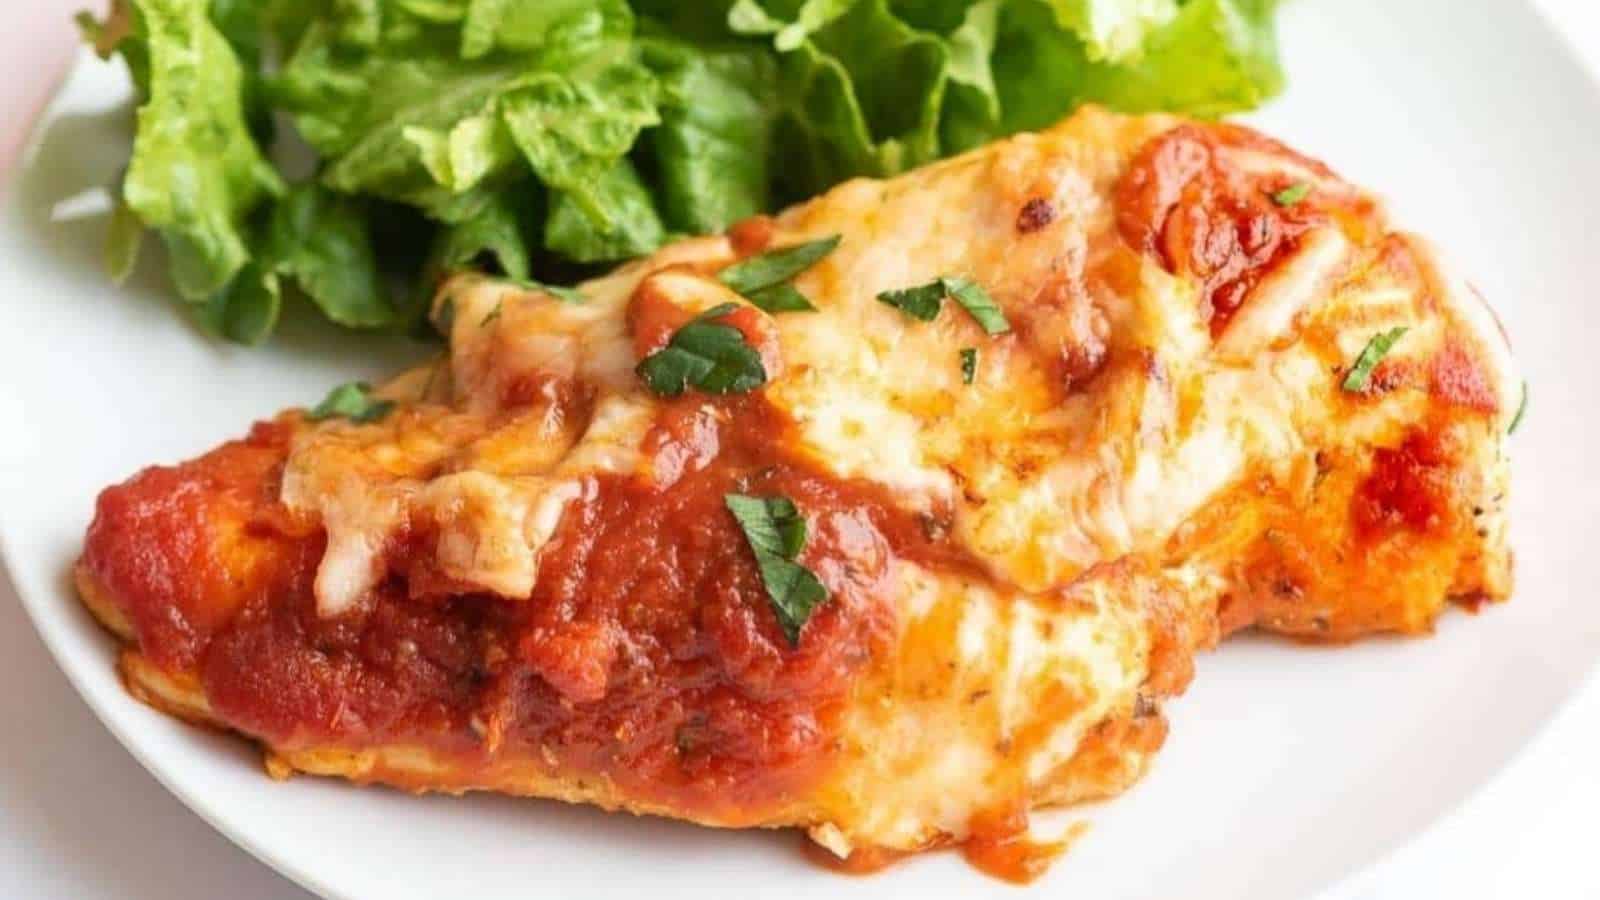 Chicken parmigiana on a white plate with a salad.